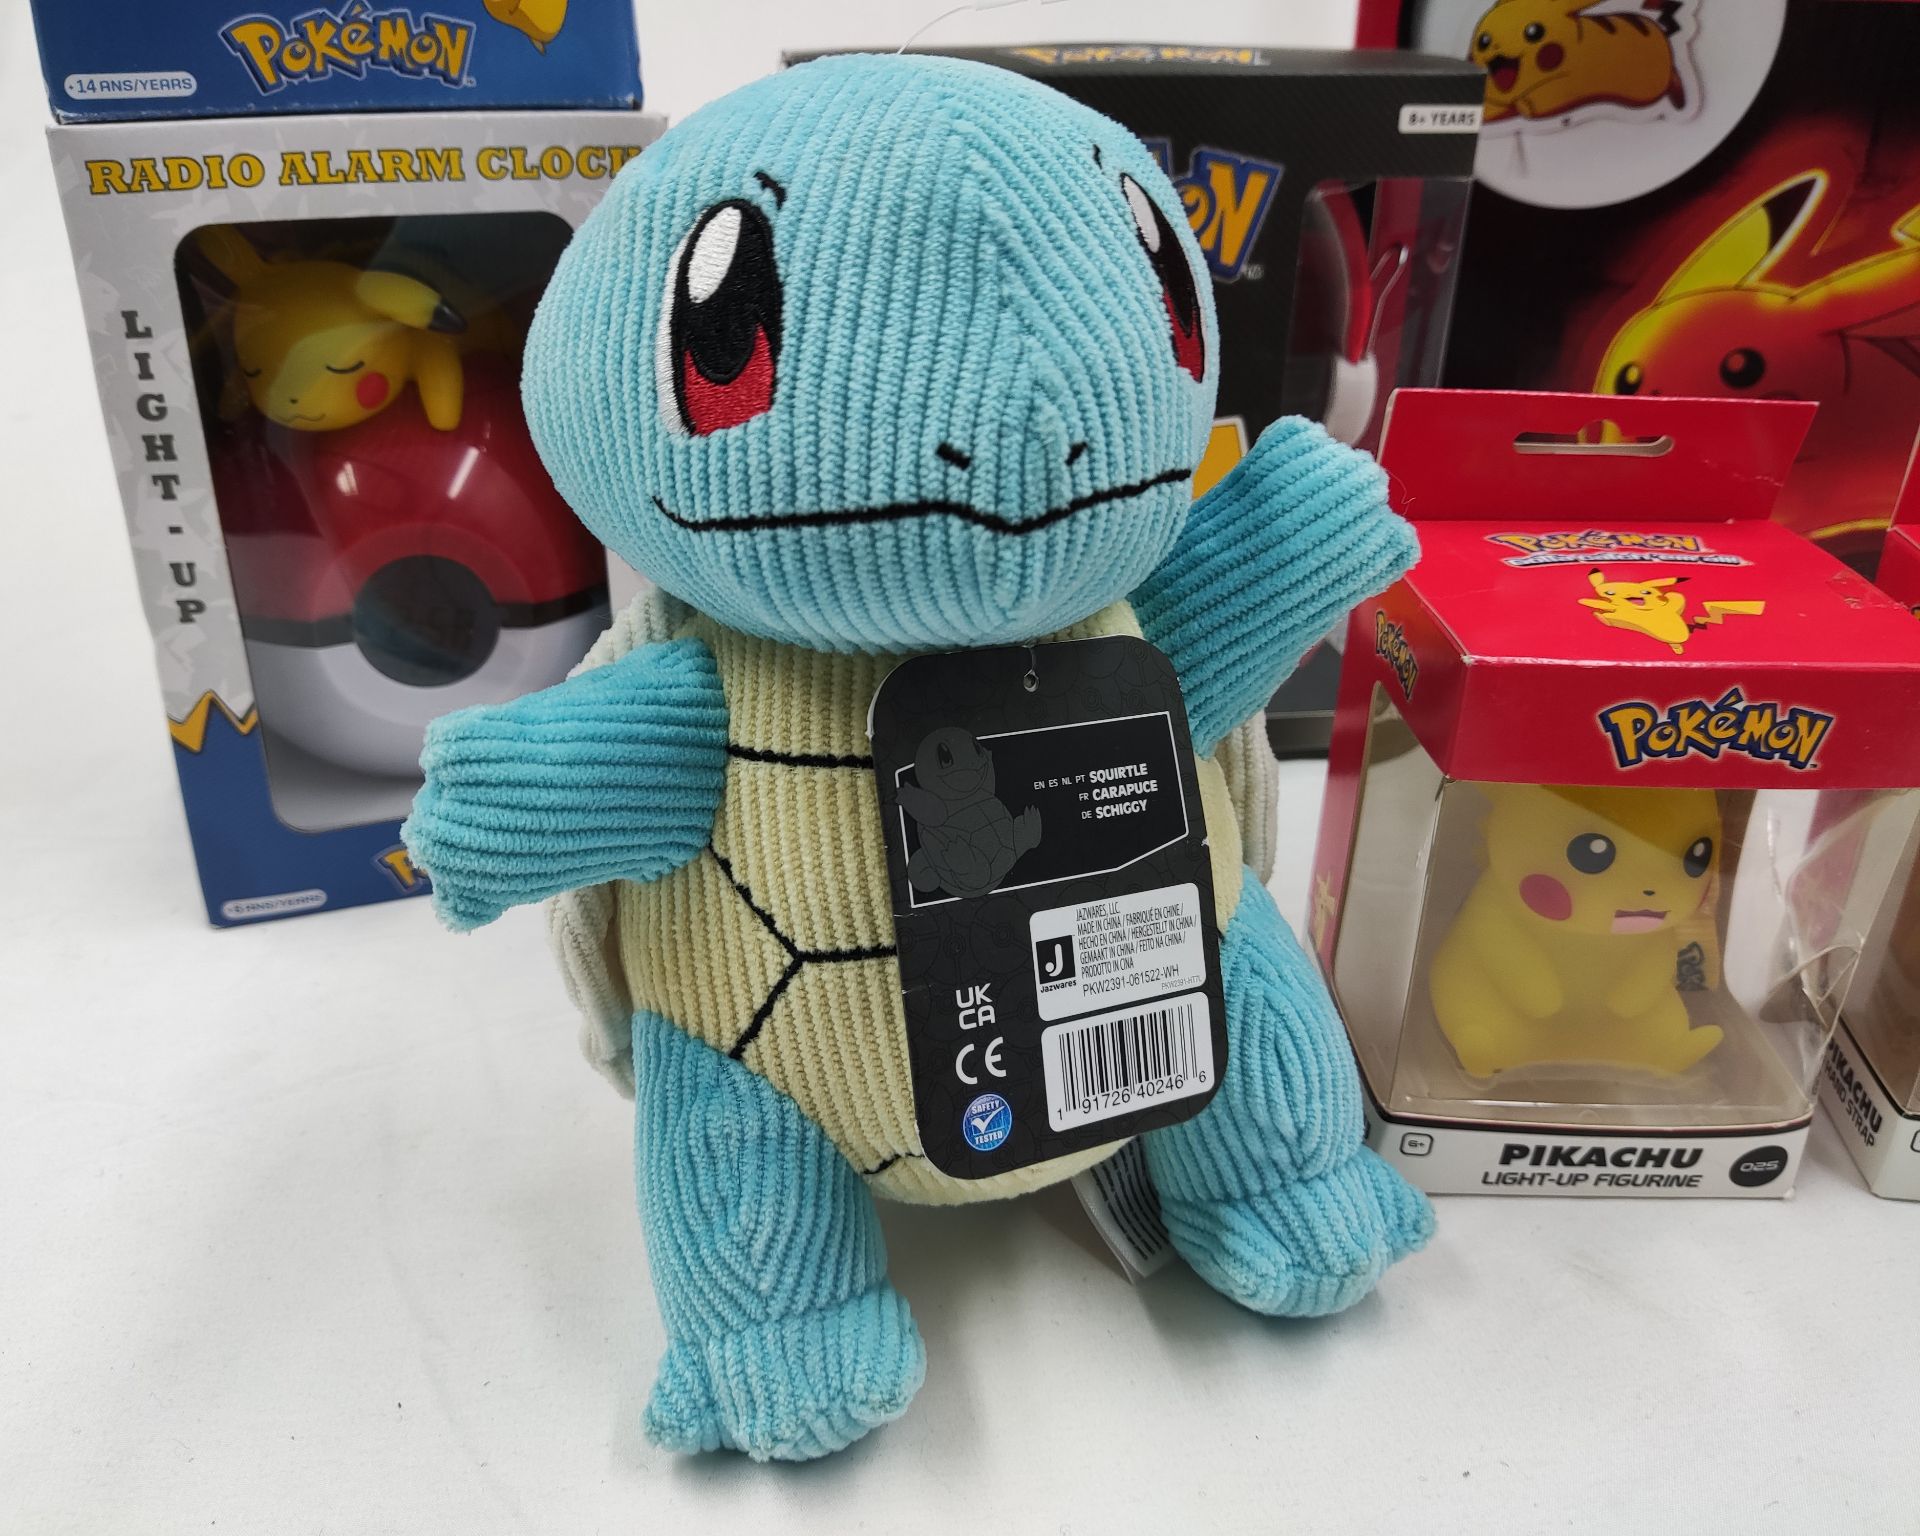 1 x POKEMON Assortment of Toys and Collectibles - Plush Squirtle, Pikachu Radio Alarm Clock and More - Image 3 of 17